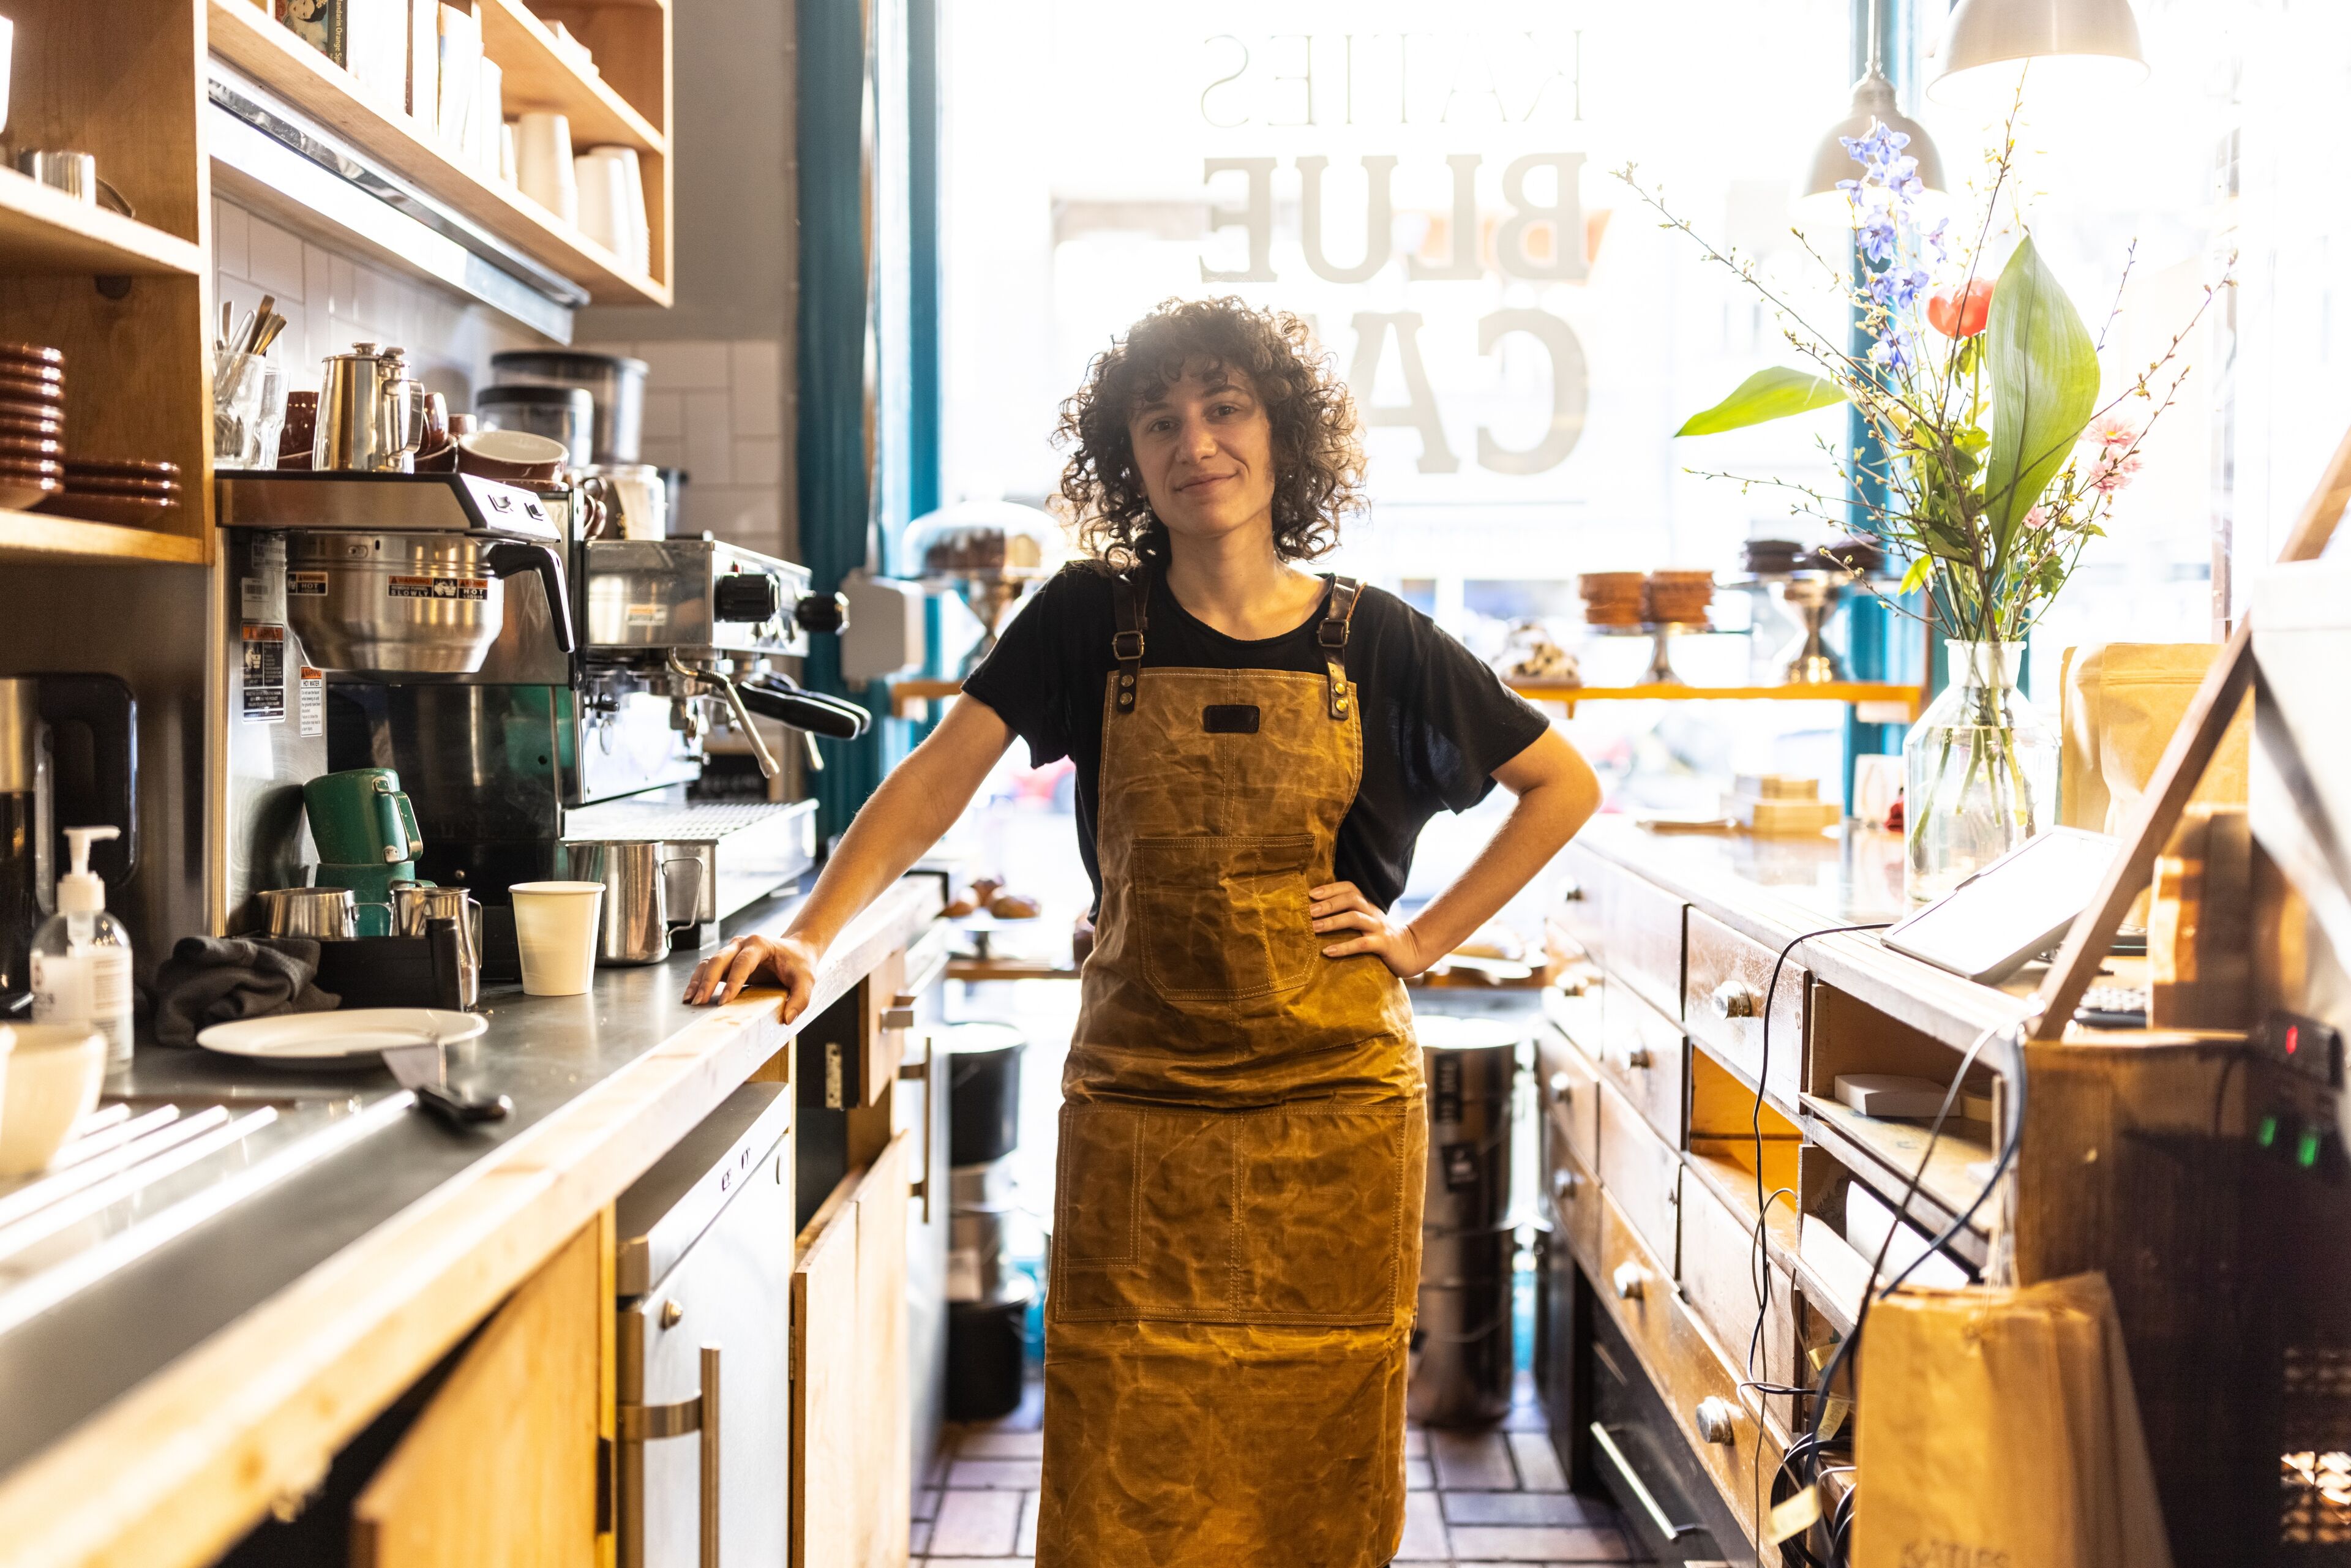 A confident female barista wearing a brown apron stands behind the counter in a well-lit coffee shop.